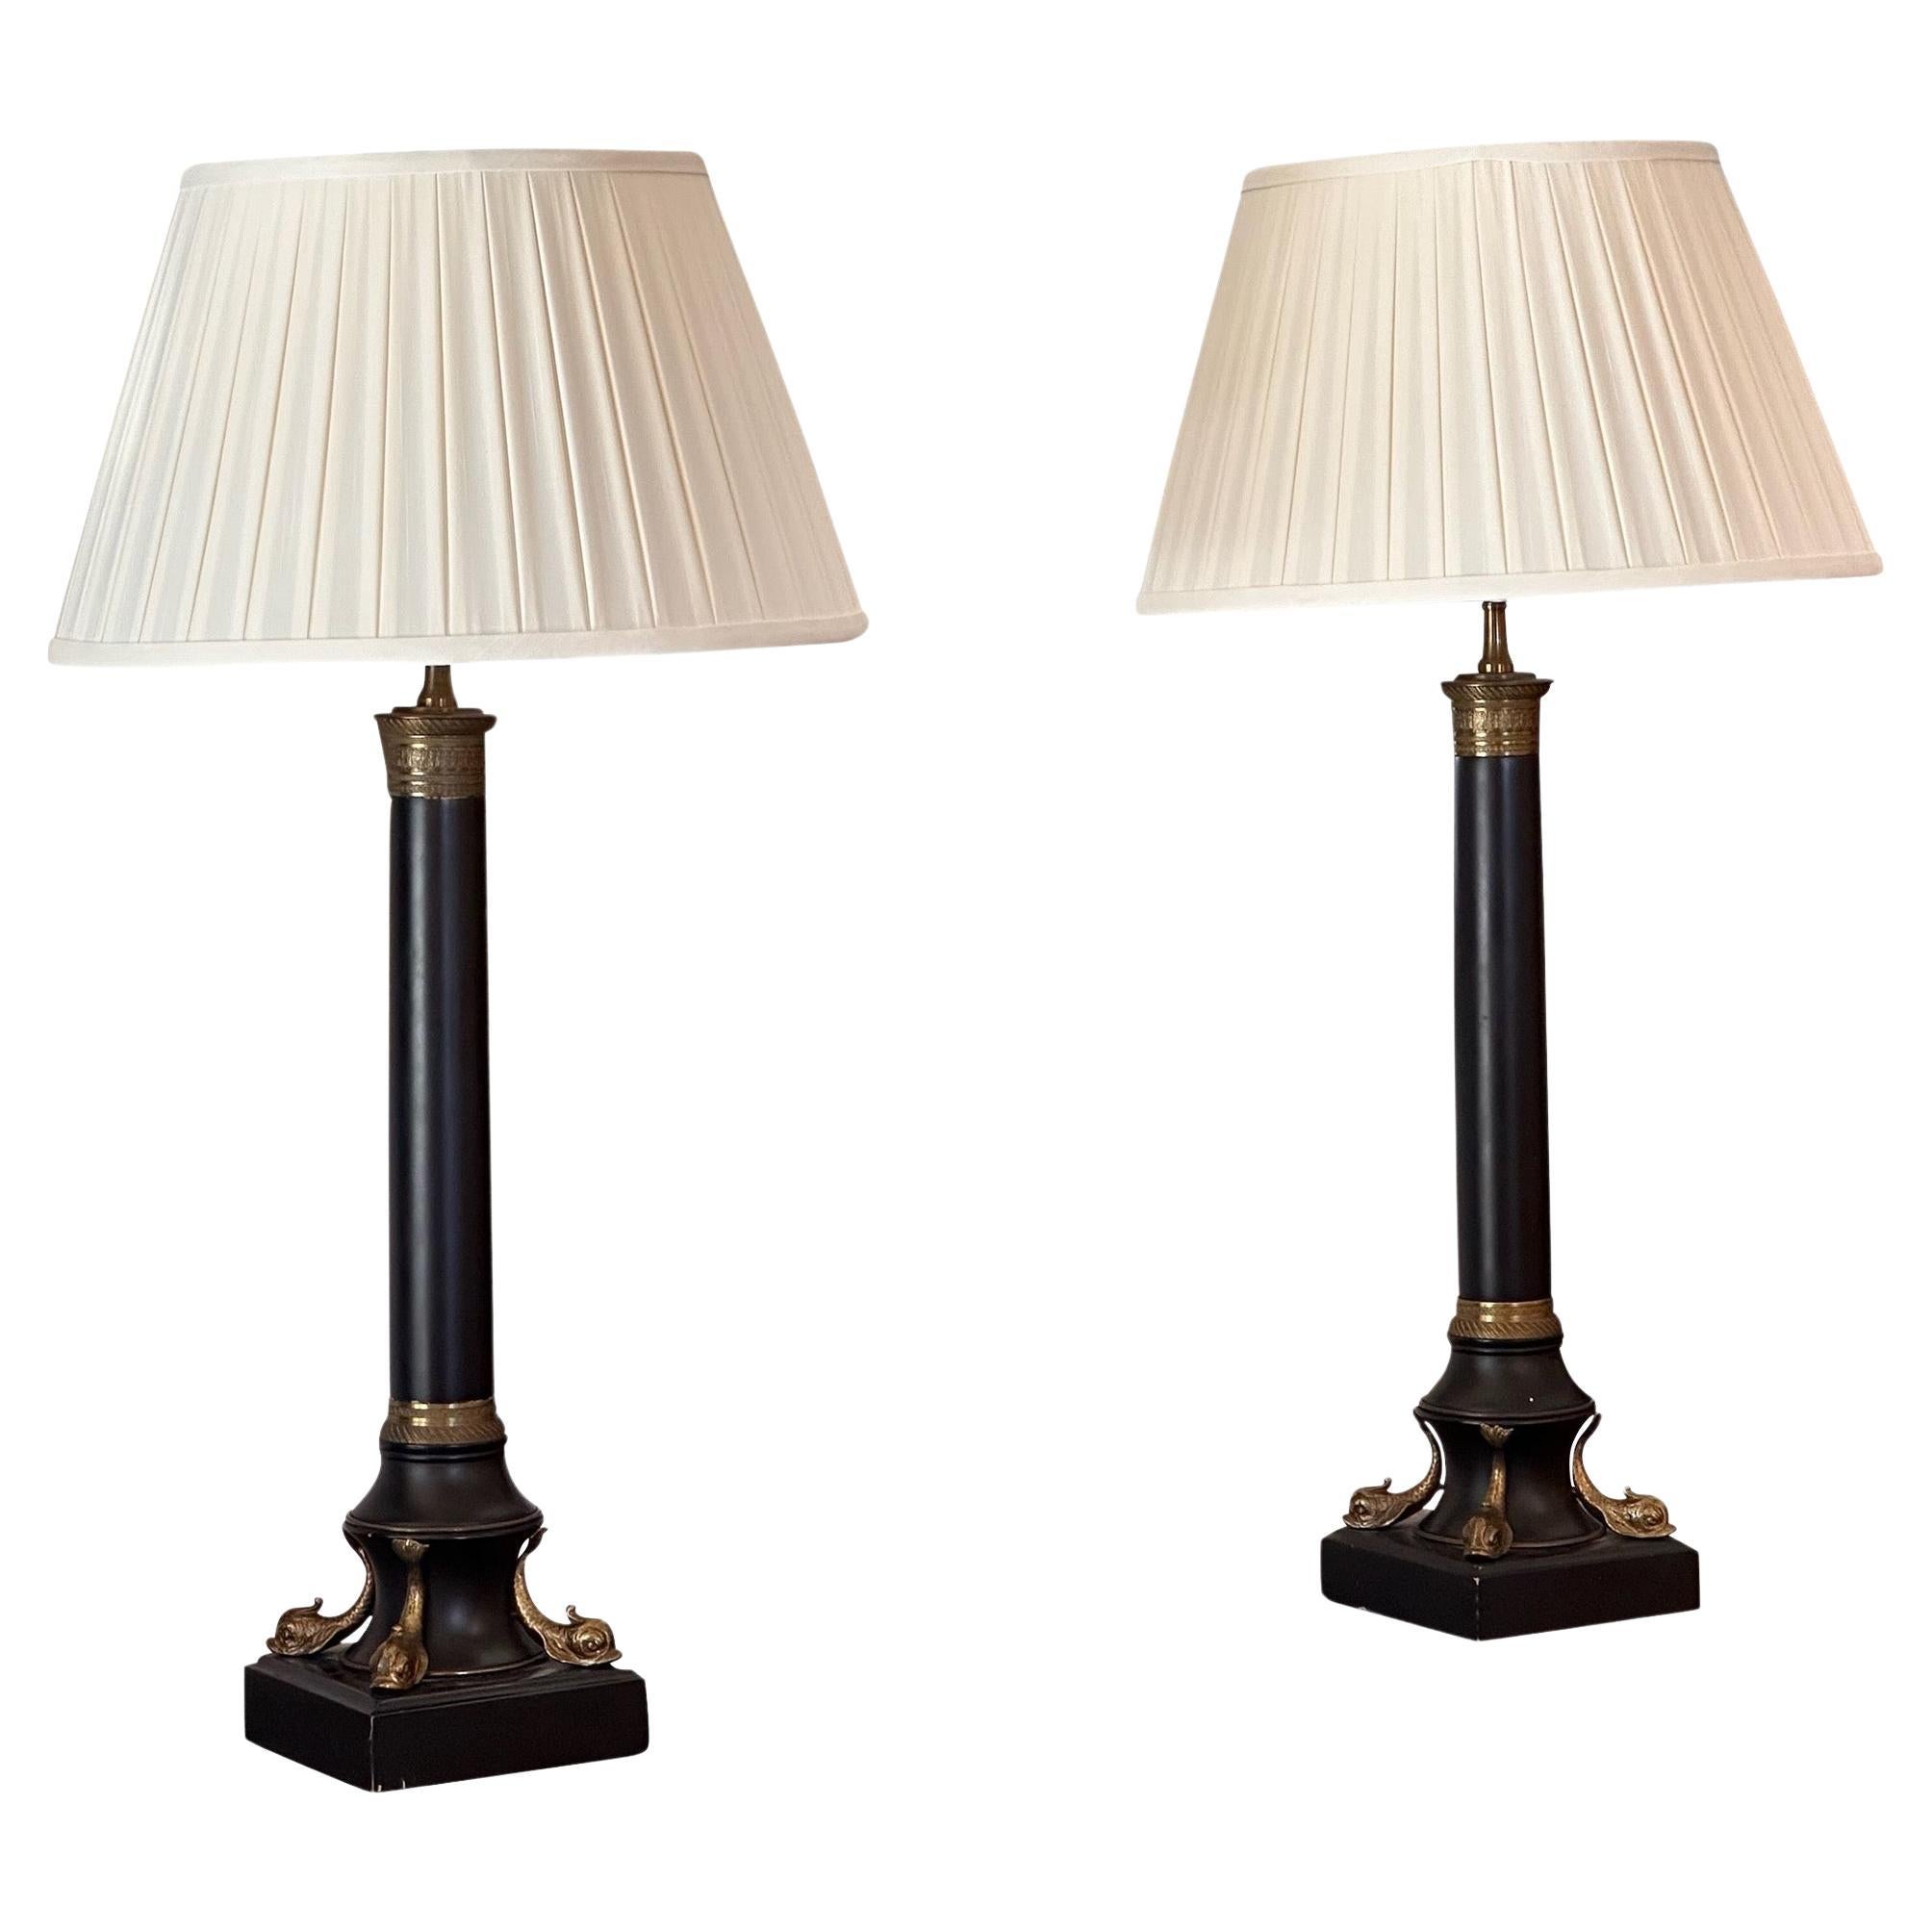 1950s French Empire Column Lamps For Sale